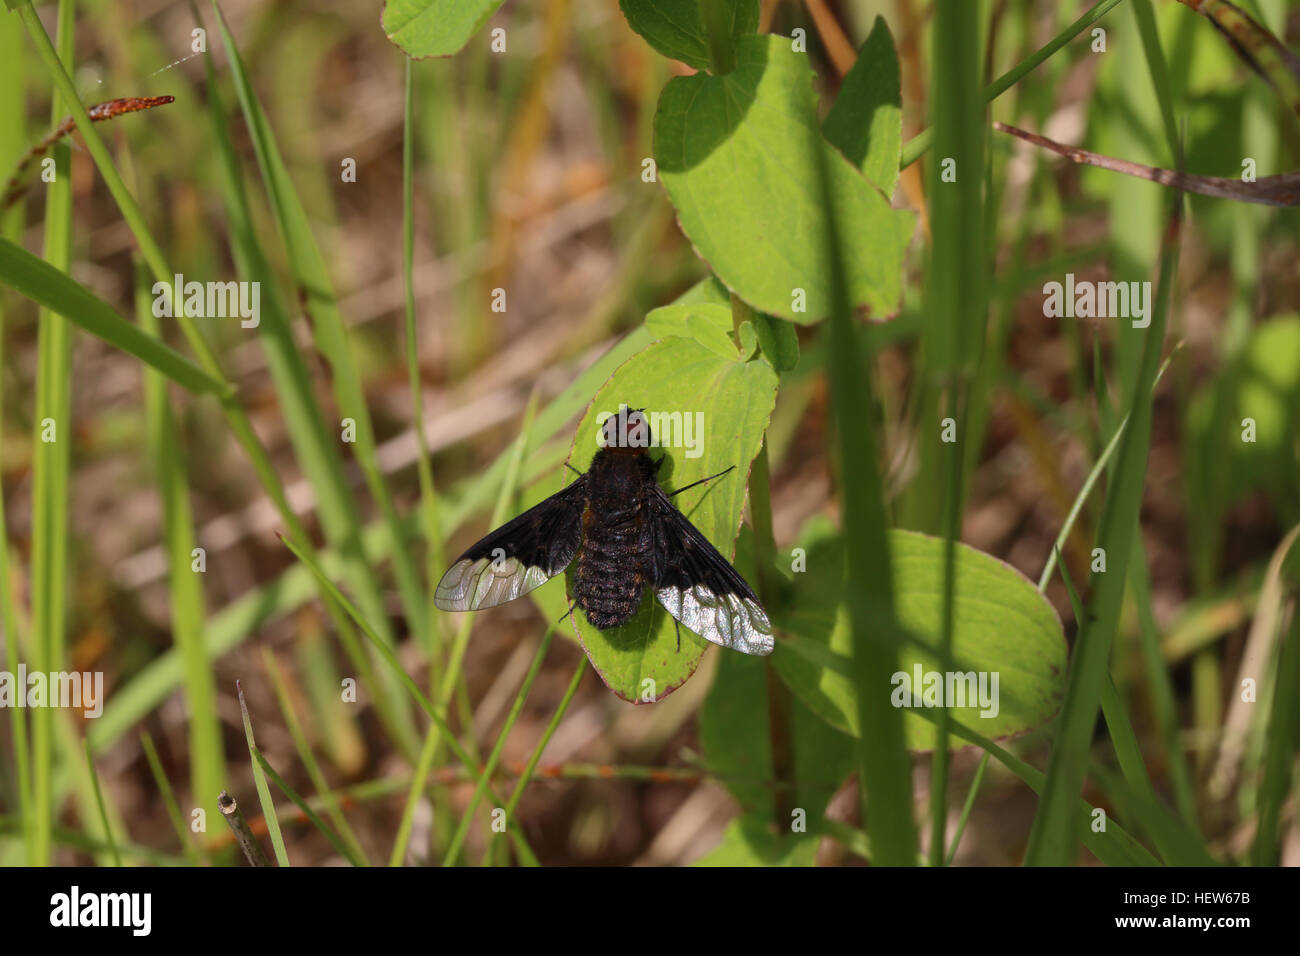 The bee-fly species (Hemipenthes morio). Photographed in Bräkne-Hoby, Sweden. Stock Photo